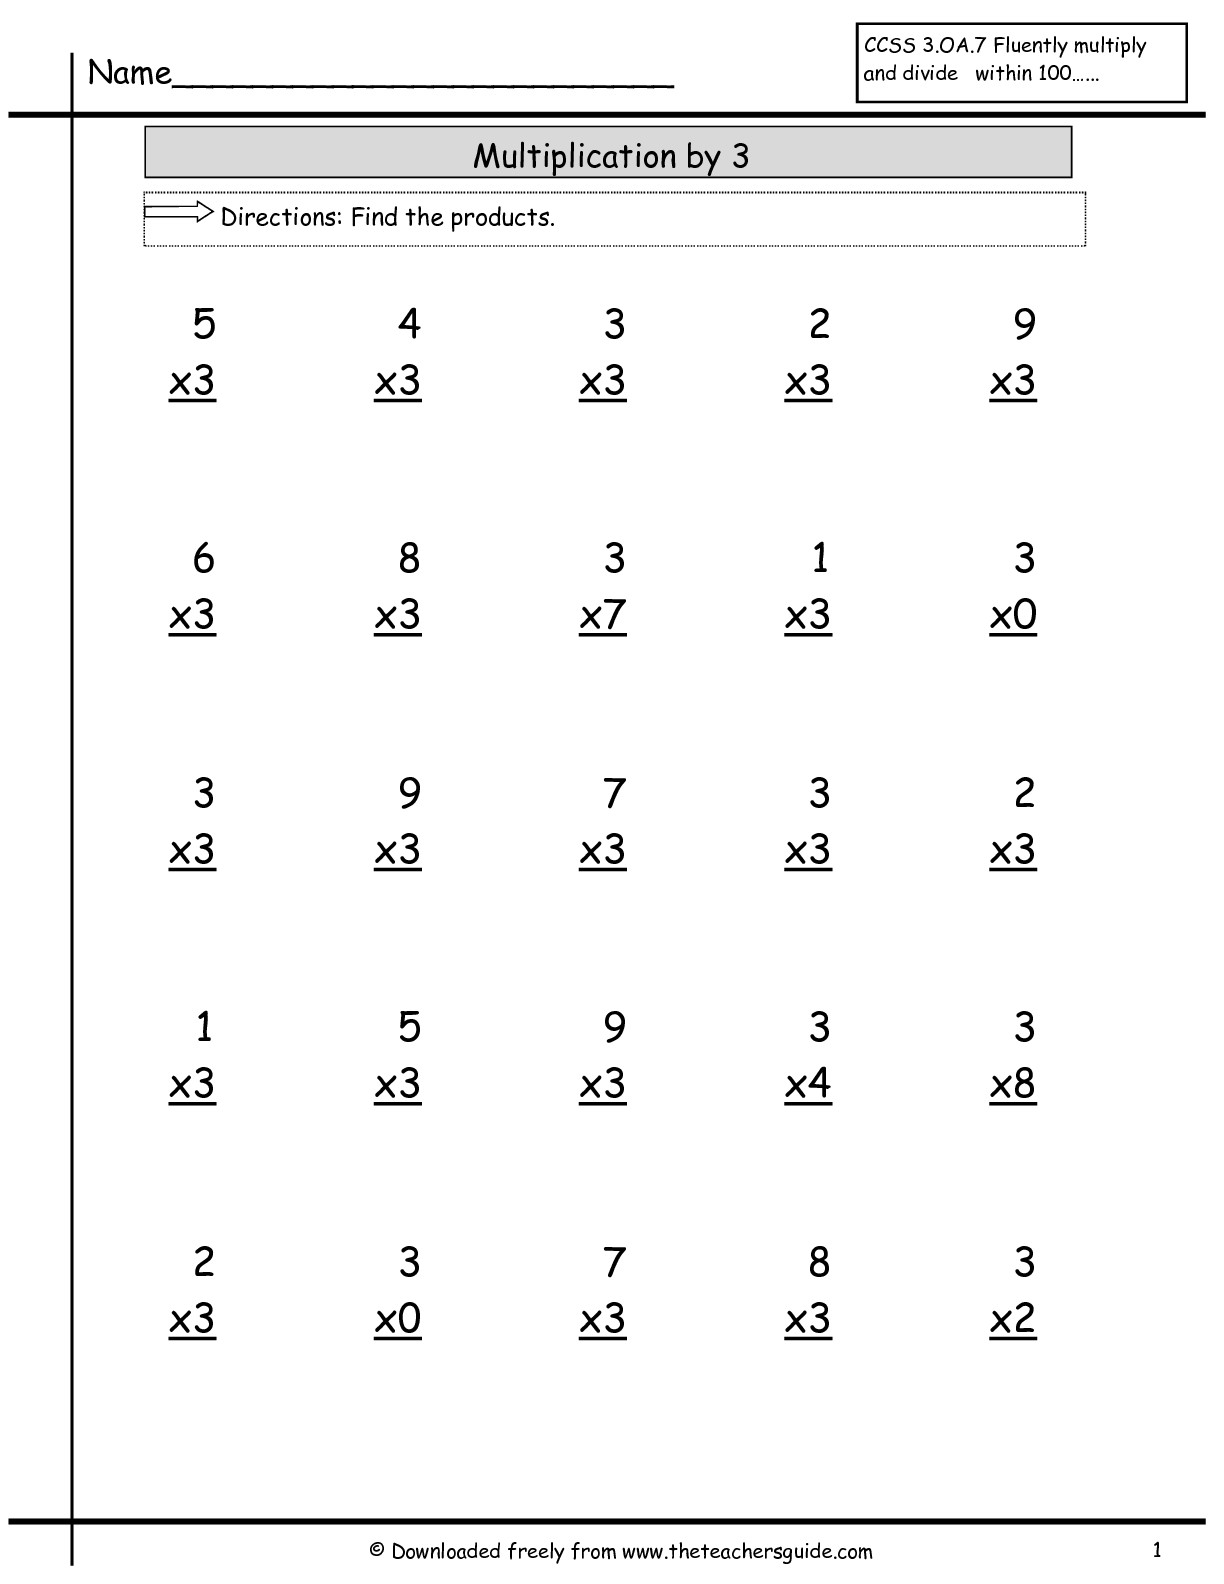 Multiplication Worksheets by 3 Image